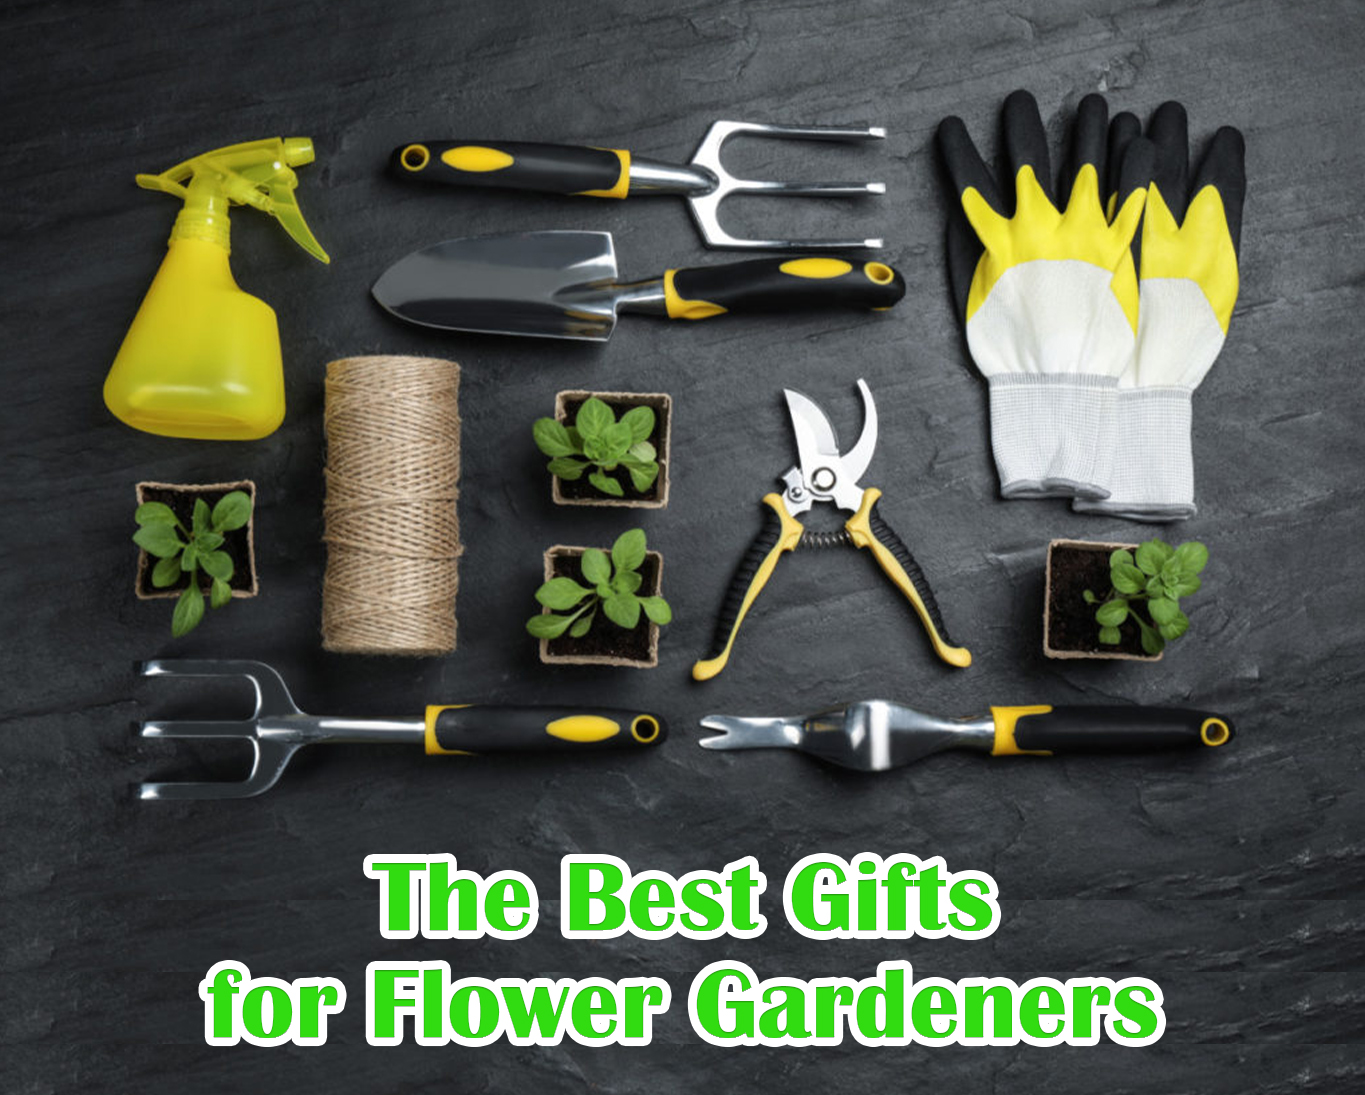 The Best Gifts for Flower Gardeners